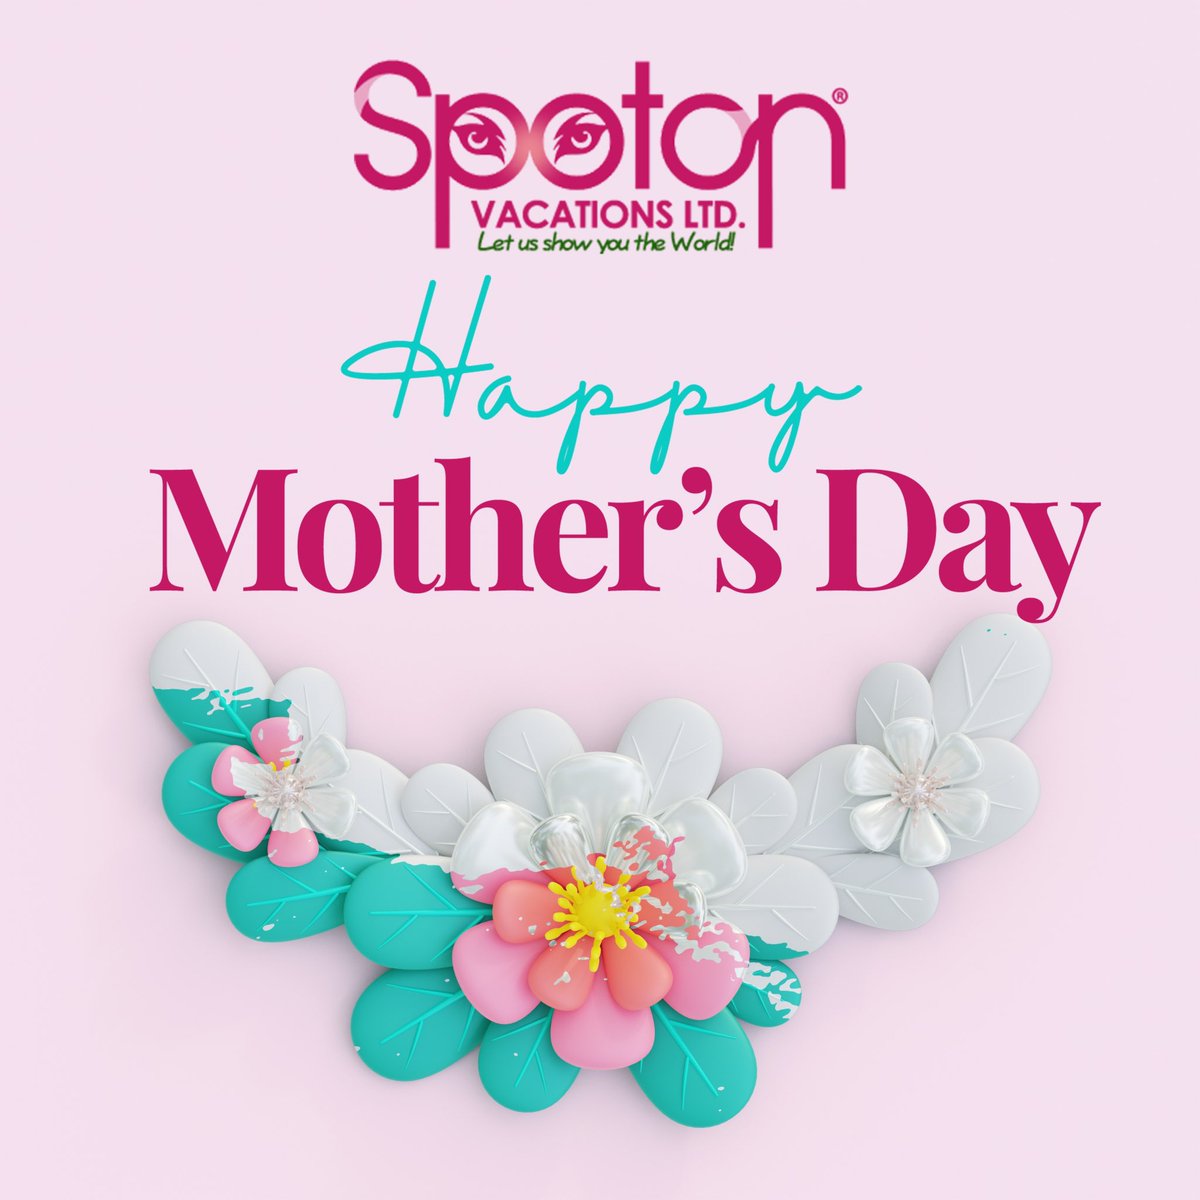 Cheers to all the amazing mothers out there, including our valued clients who make every getaway unforgettable! #HappyMothersDay #ClientAppreciation #SpotOnVacations 🌟✈️